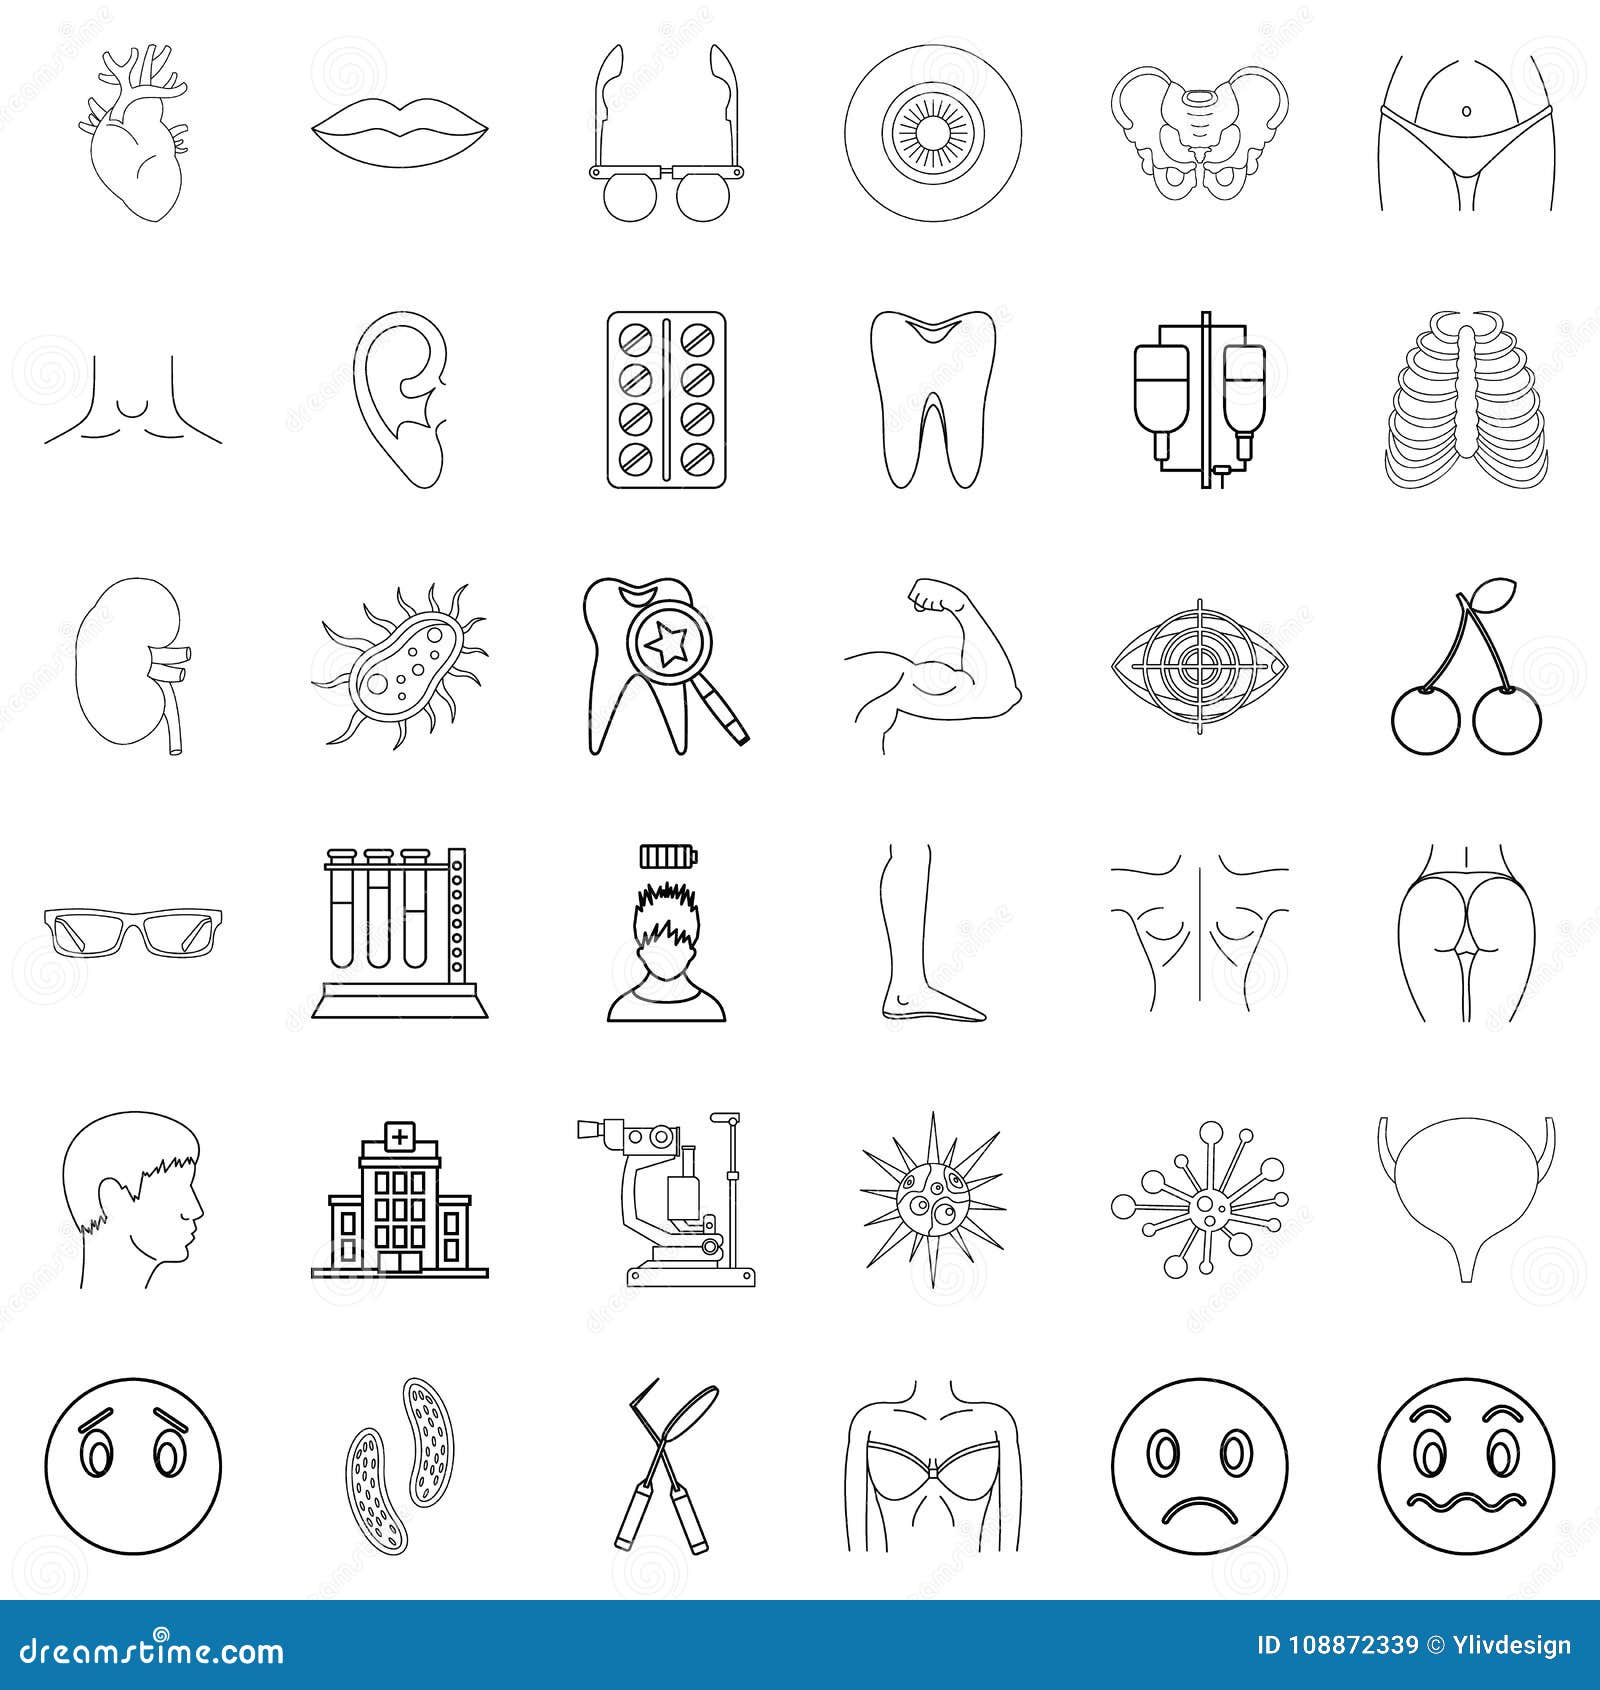 medico icons set, outline style